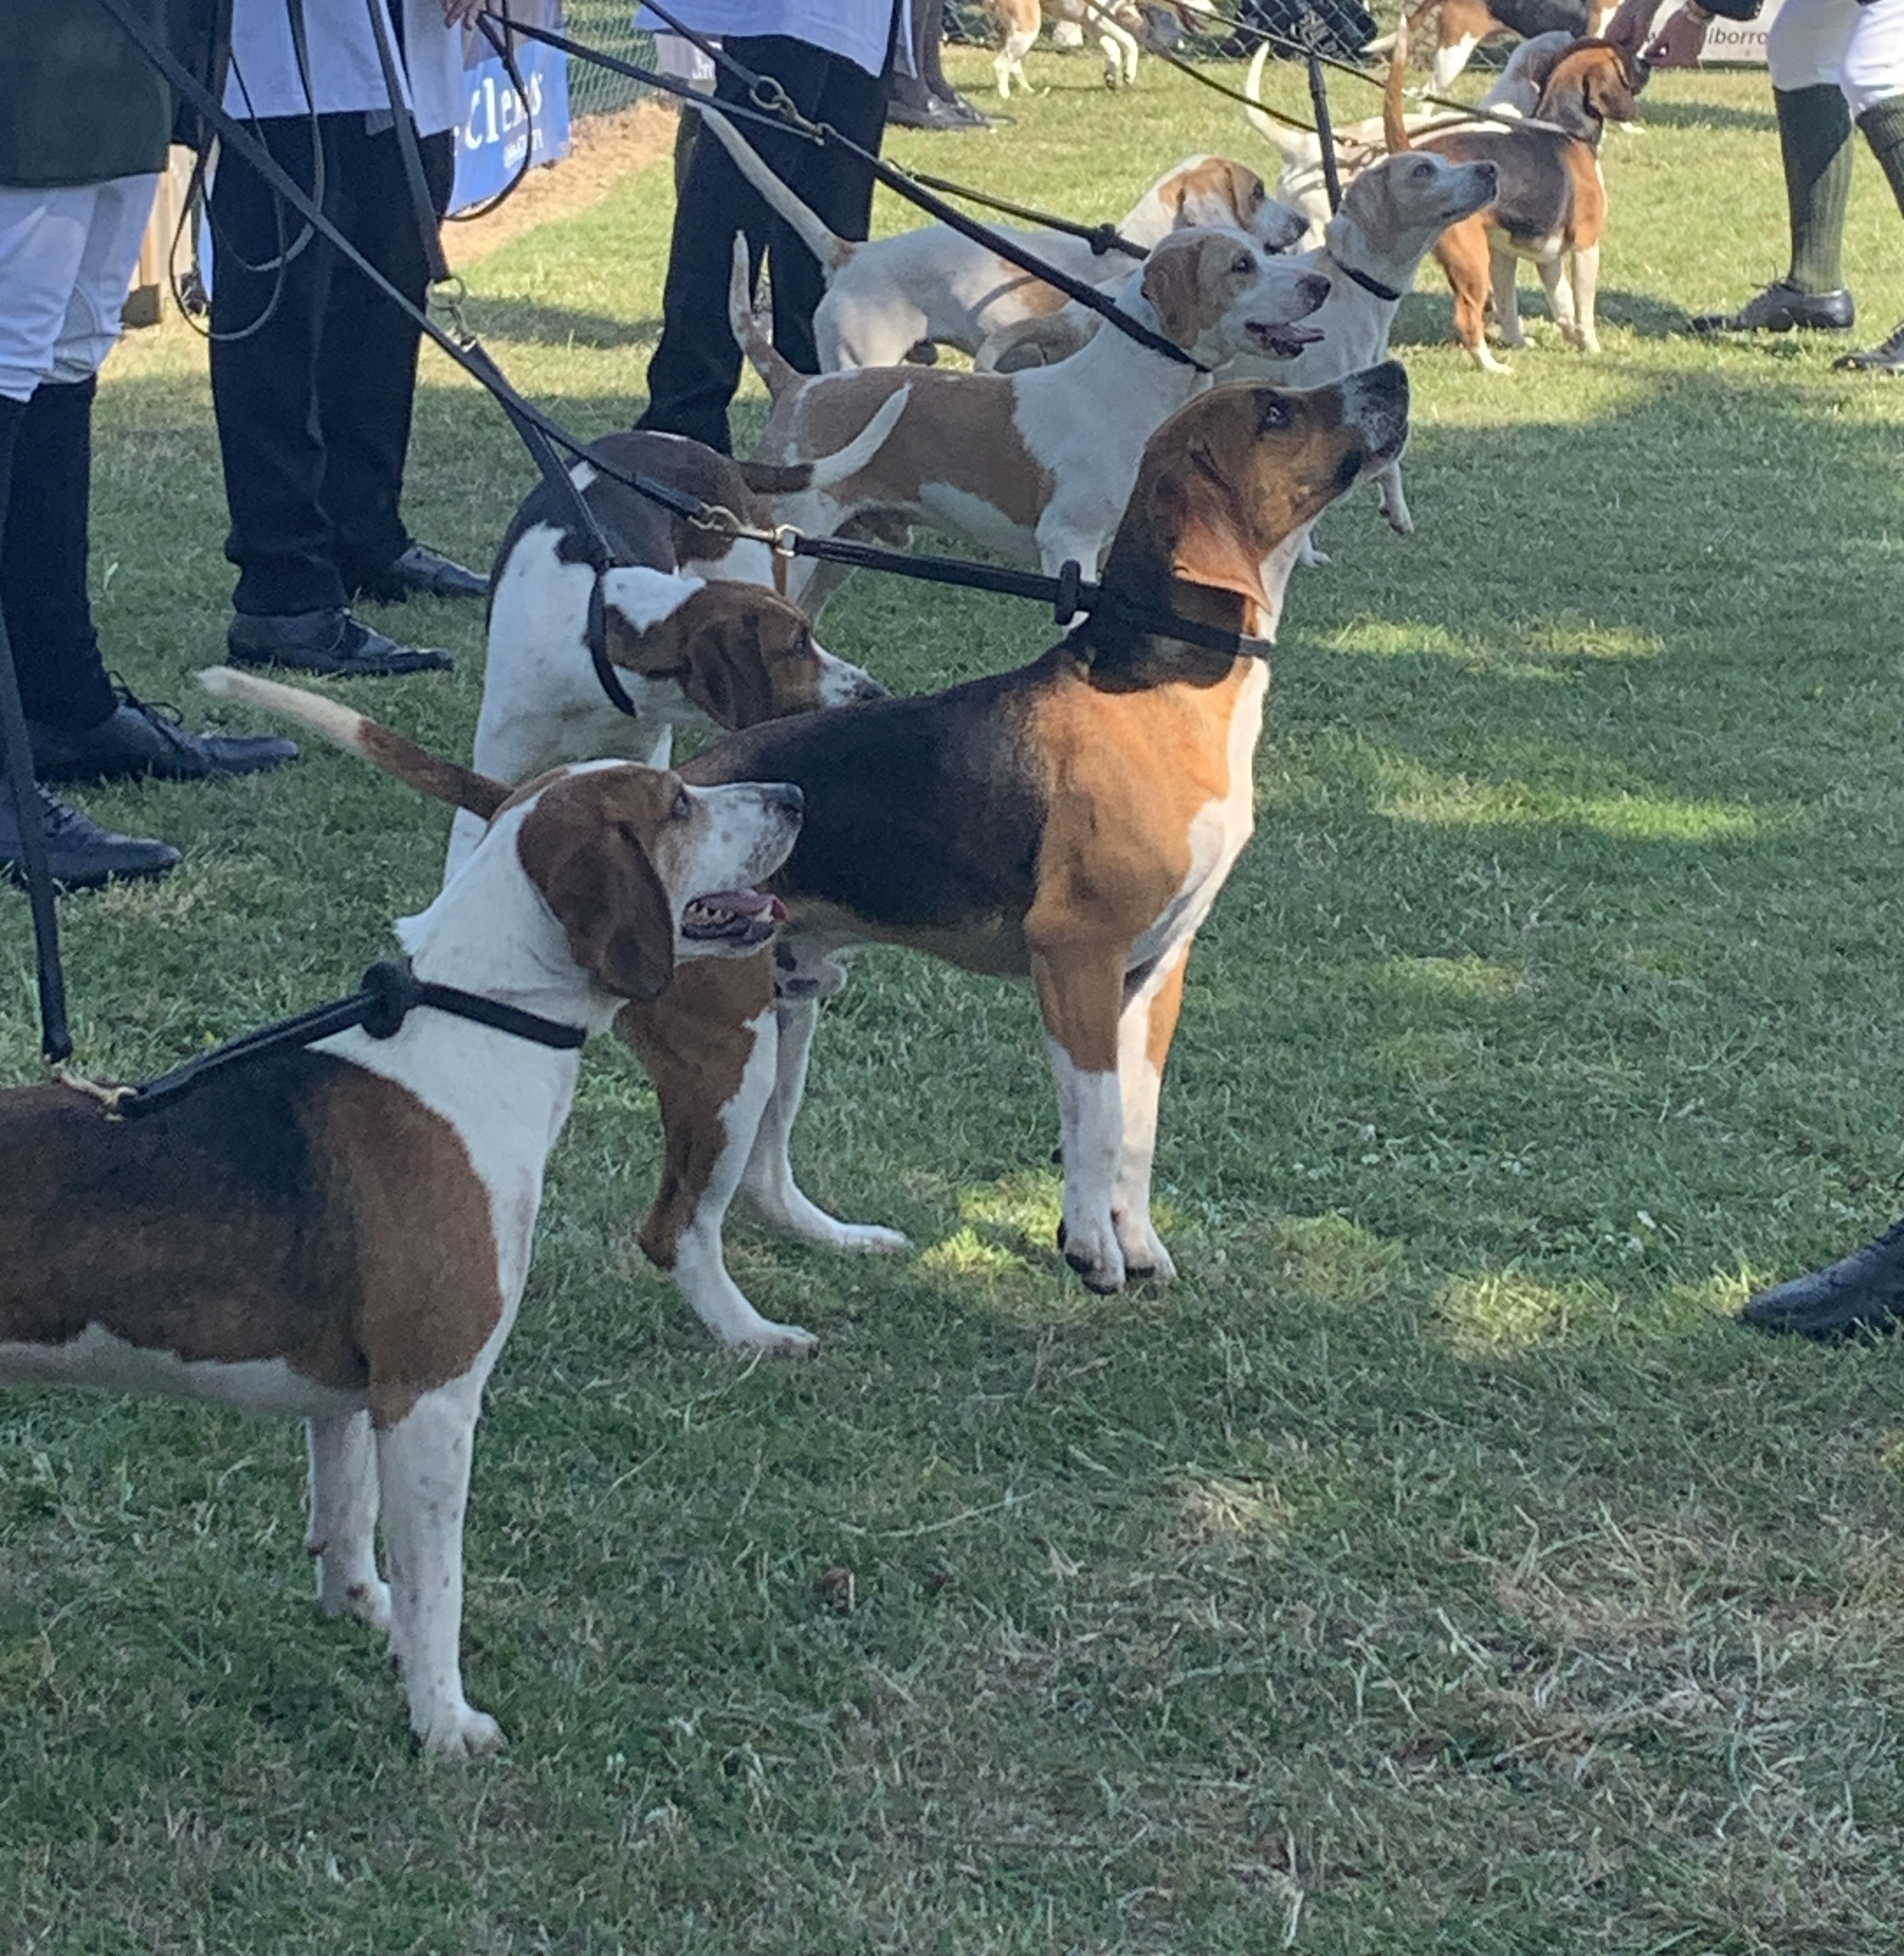 How to spot the winning beagle at a hound show